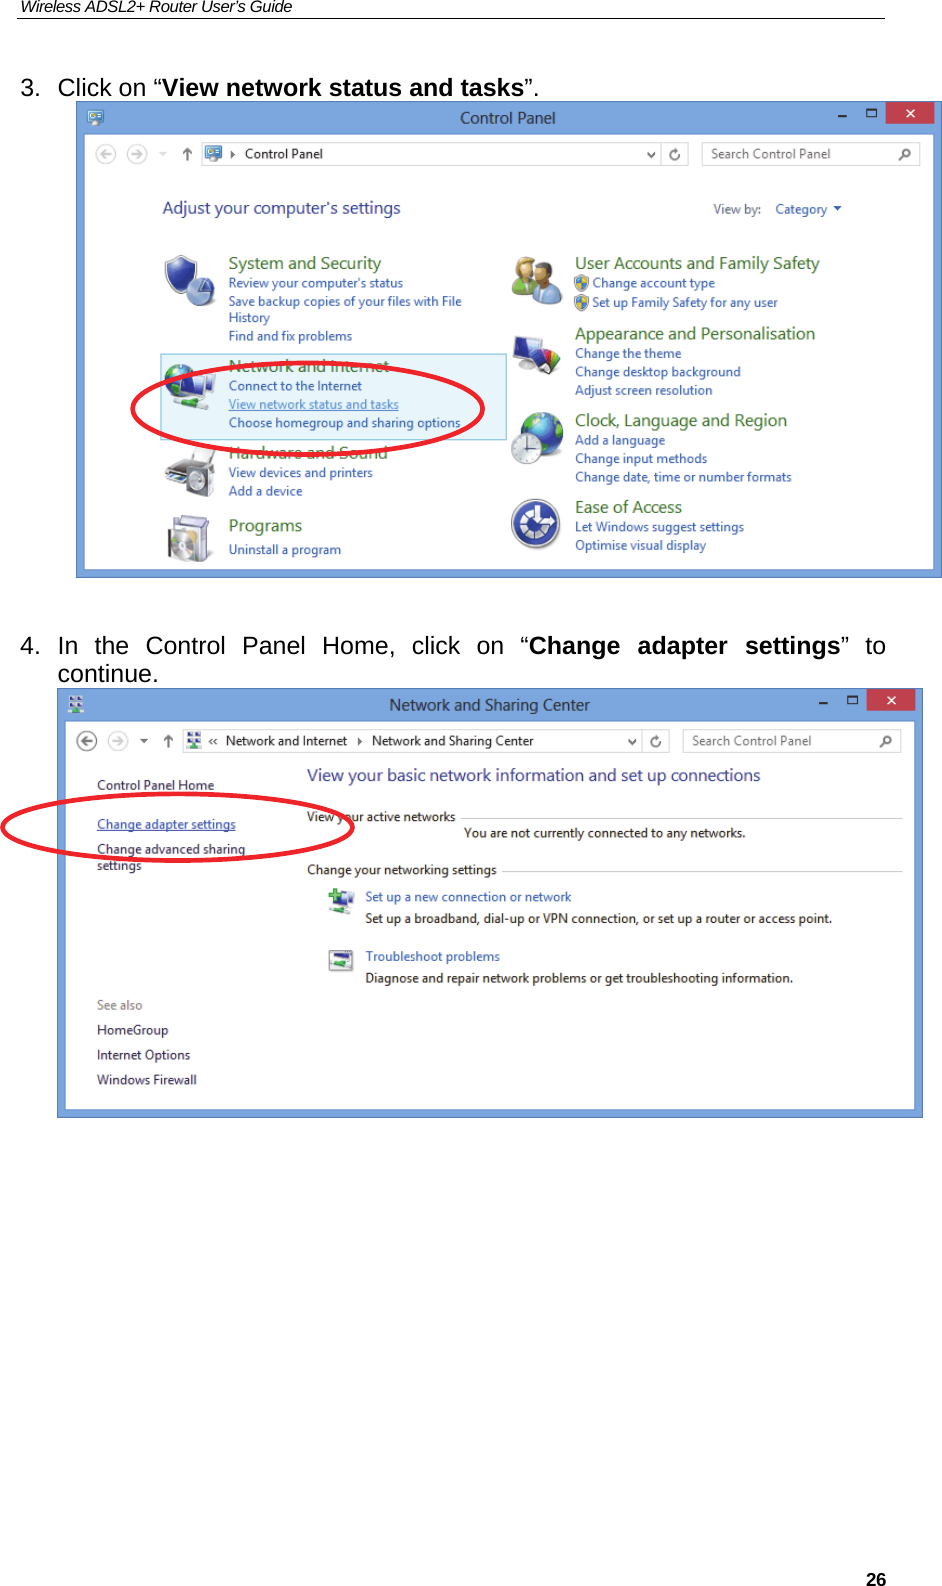 Wireless ADSL2+ Router User’s Guide     263.  Click on “View network status and tasks”.   4. In the Control Panel Home, click on “Change adapter settings” to continue.           